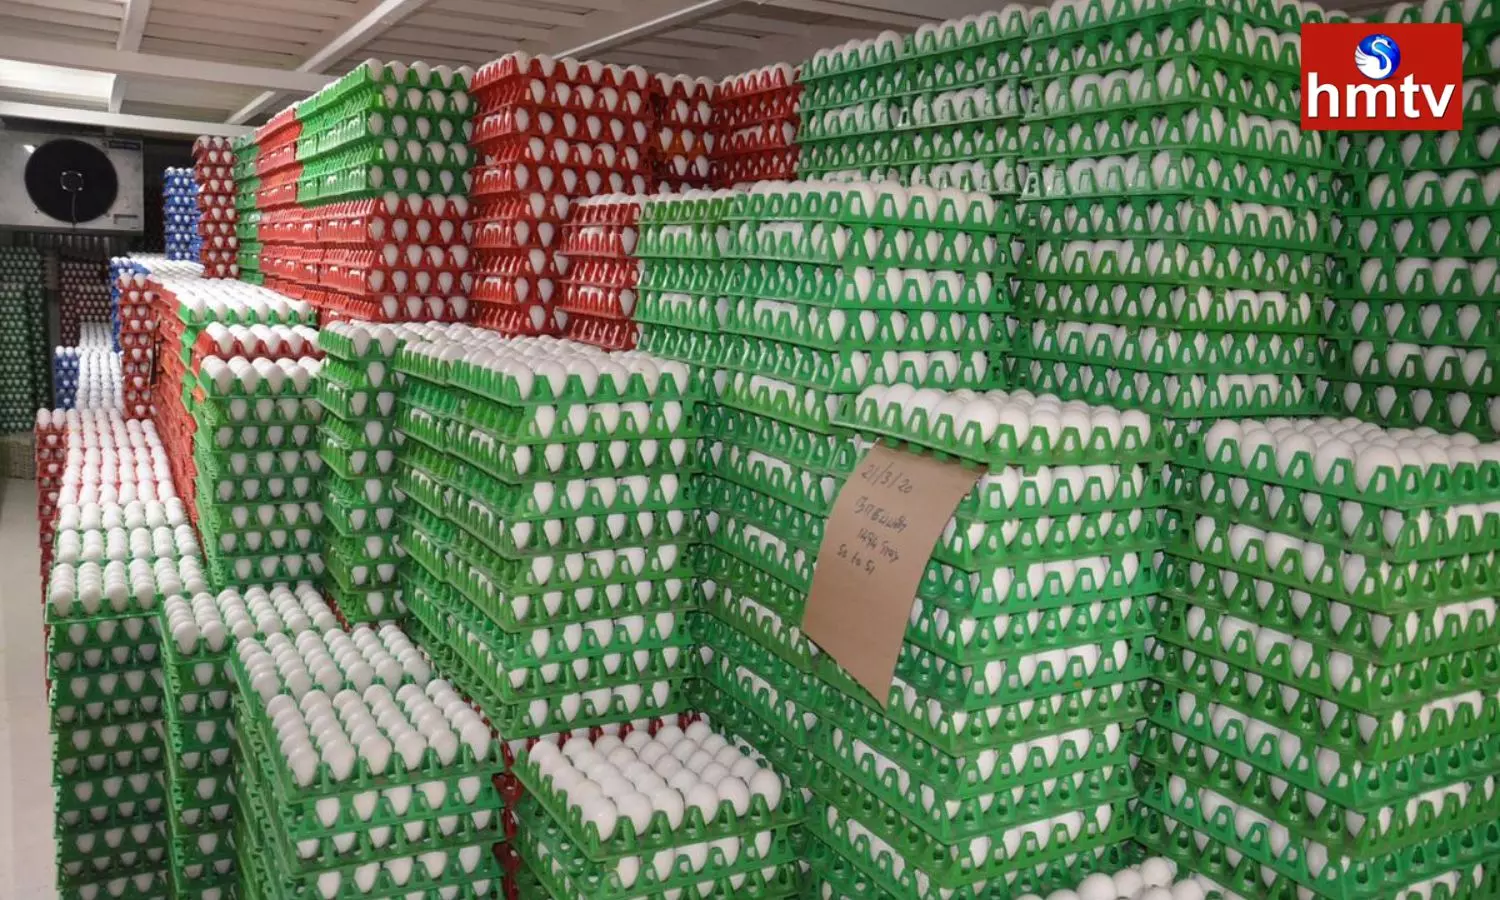 Eggs are Selling Wildly During the FIFA World Cup Demand has Increased Greatly